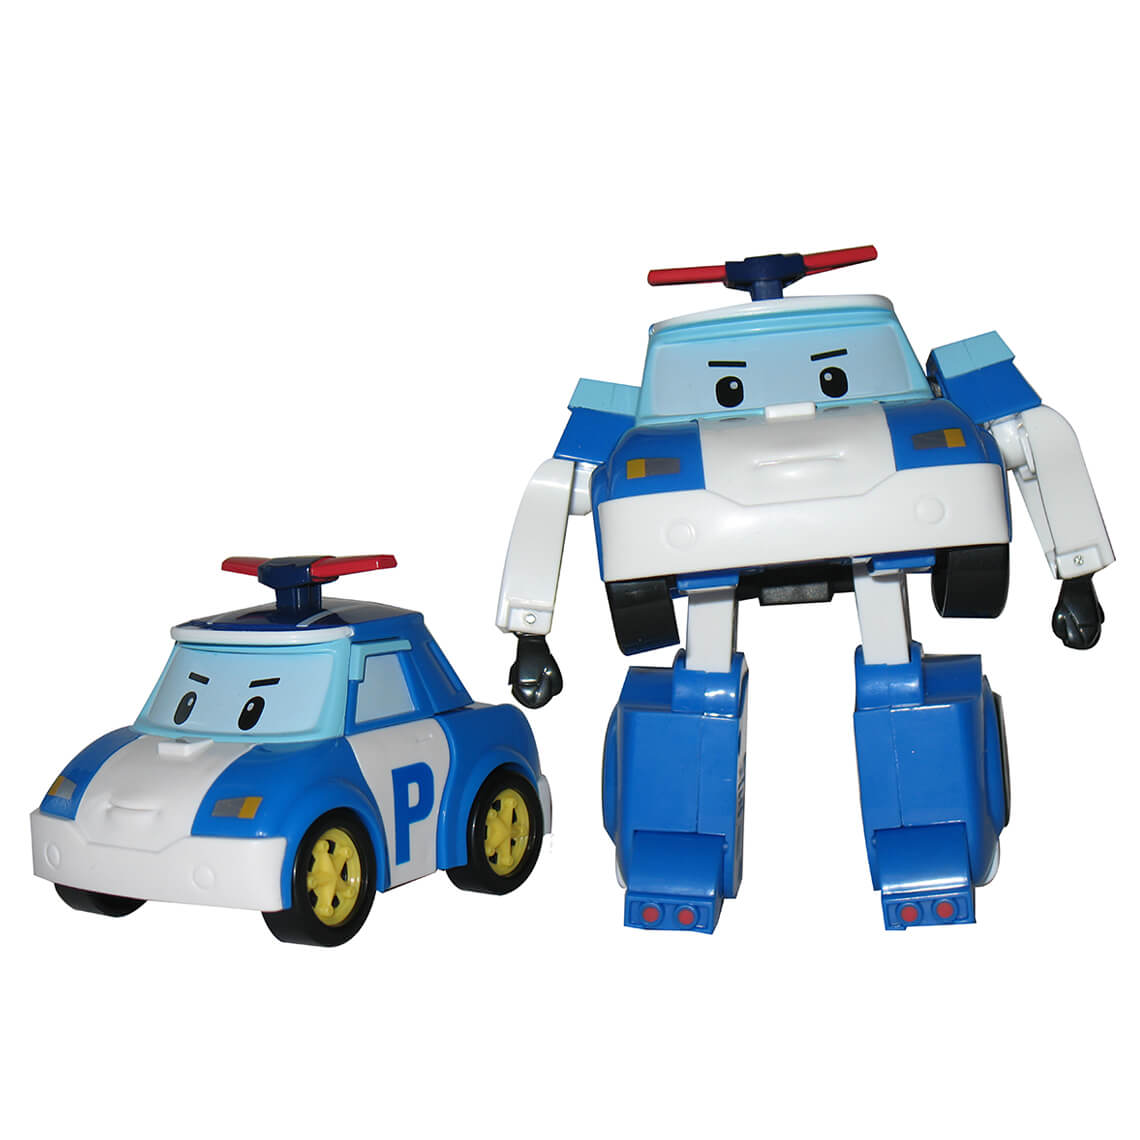 Voiture Transformable Robot - Police - Blanc